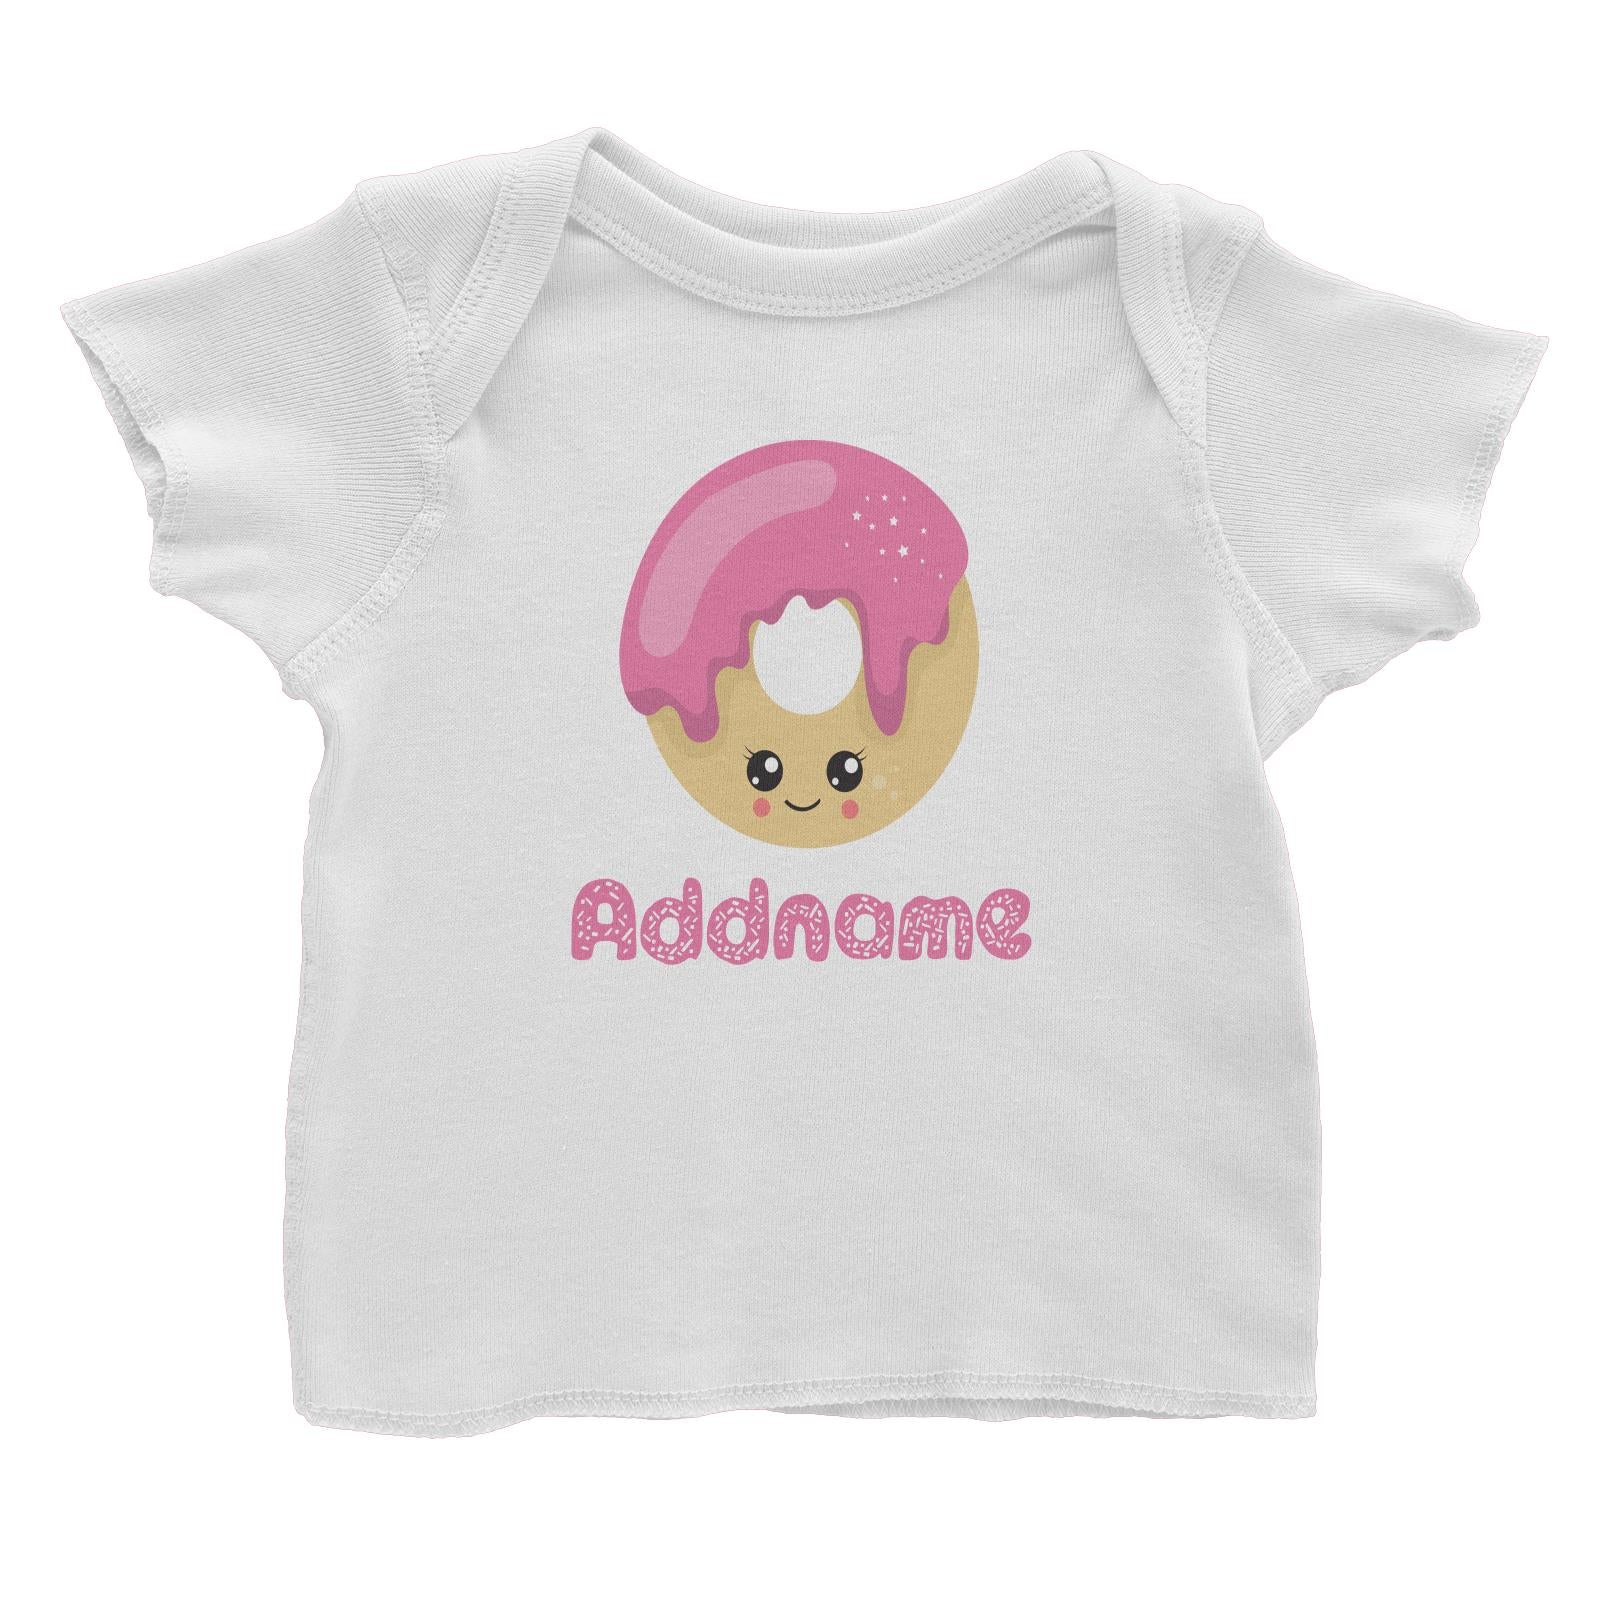 Magical Sweets Pink Donut Addname Baby T-Shirt